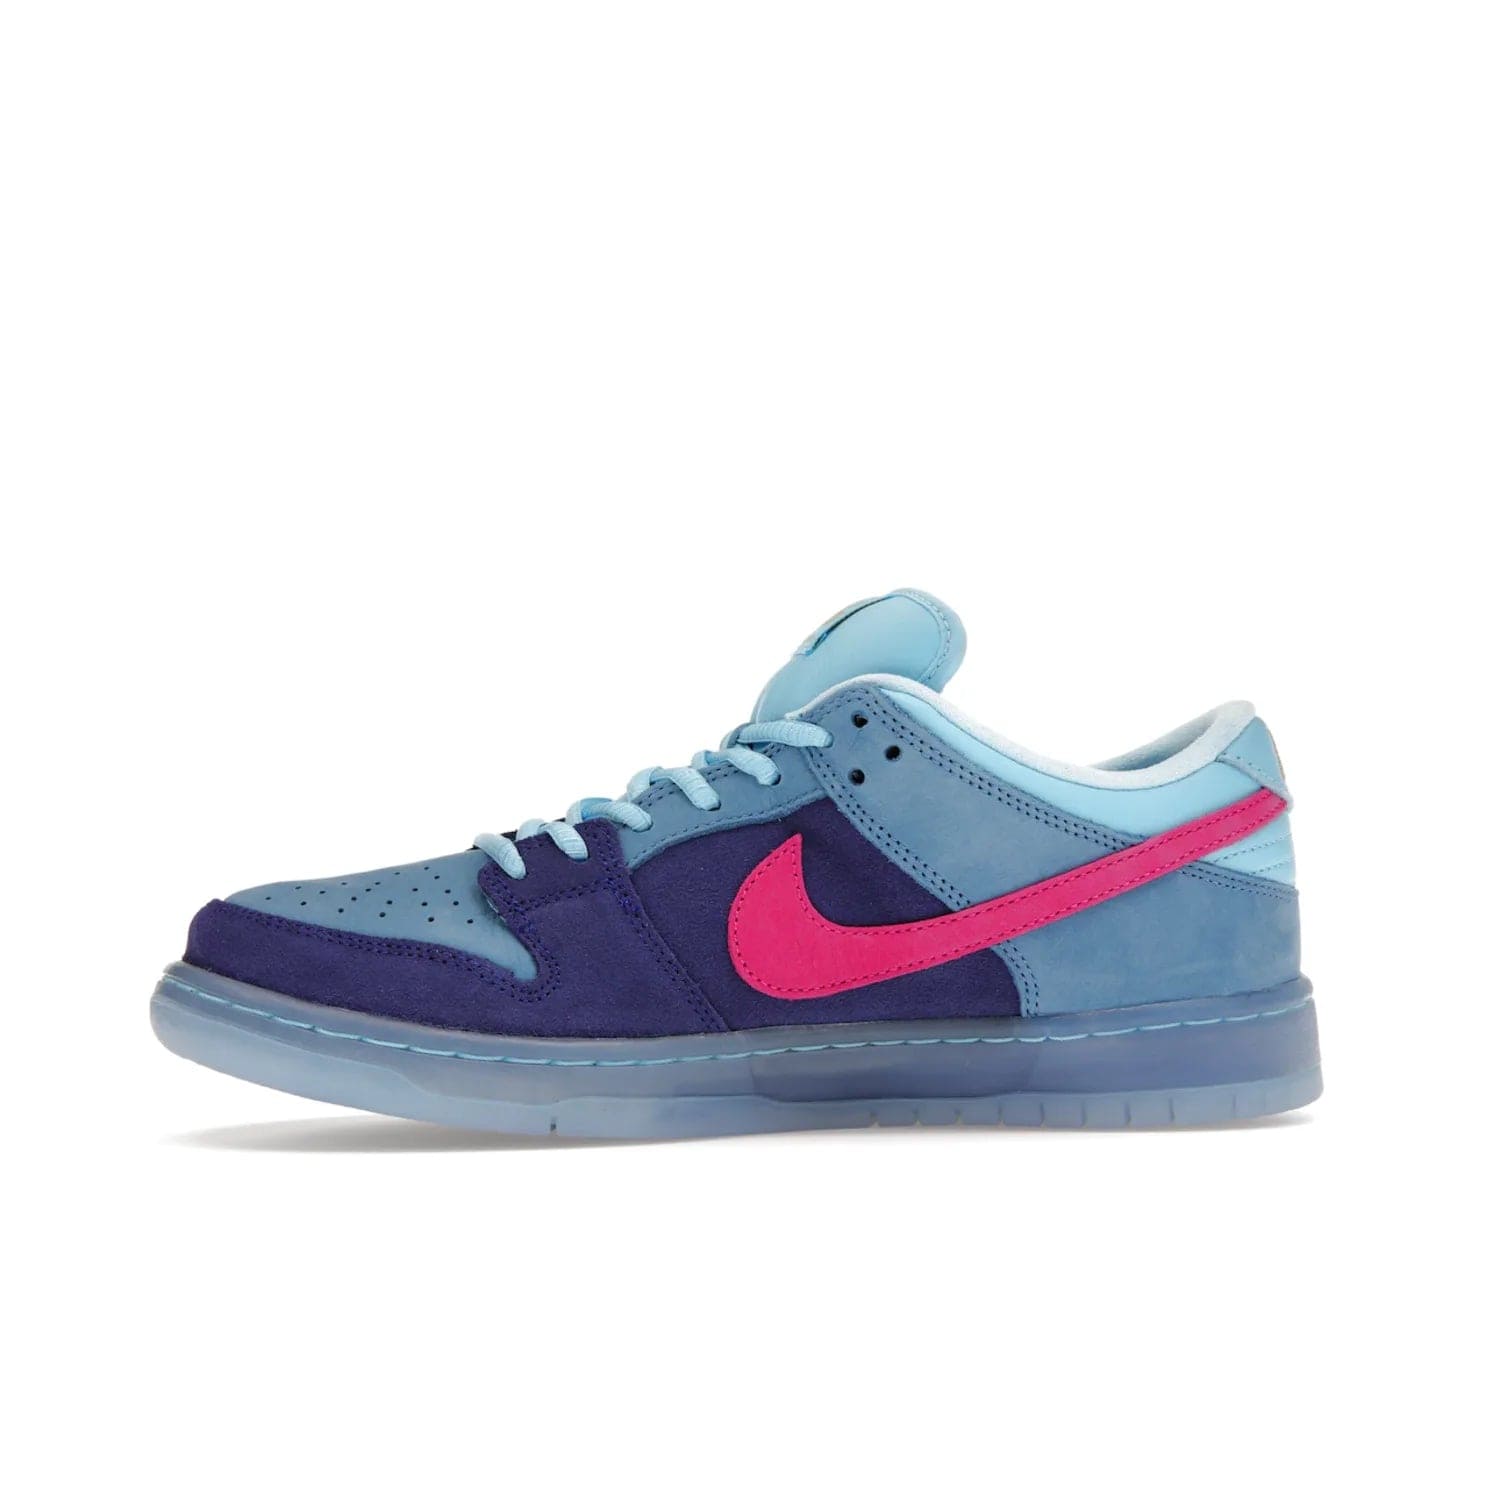 Nike SB Dunk Low Run The Jewels - Image 18 - Only at www.BallersClubKickz.com - The Nike SB Dunk Low Run The Jewels pays tribute to the Run the Jewels 3 album cover. It features a blue suede upper with pink suede accents, gold branding and 3 lace sets. RTJ insoles complete this limited edition sneaker. Get it now for your shoe collection.